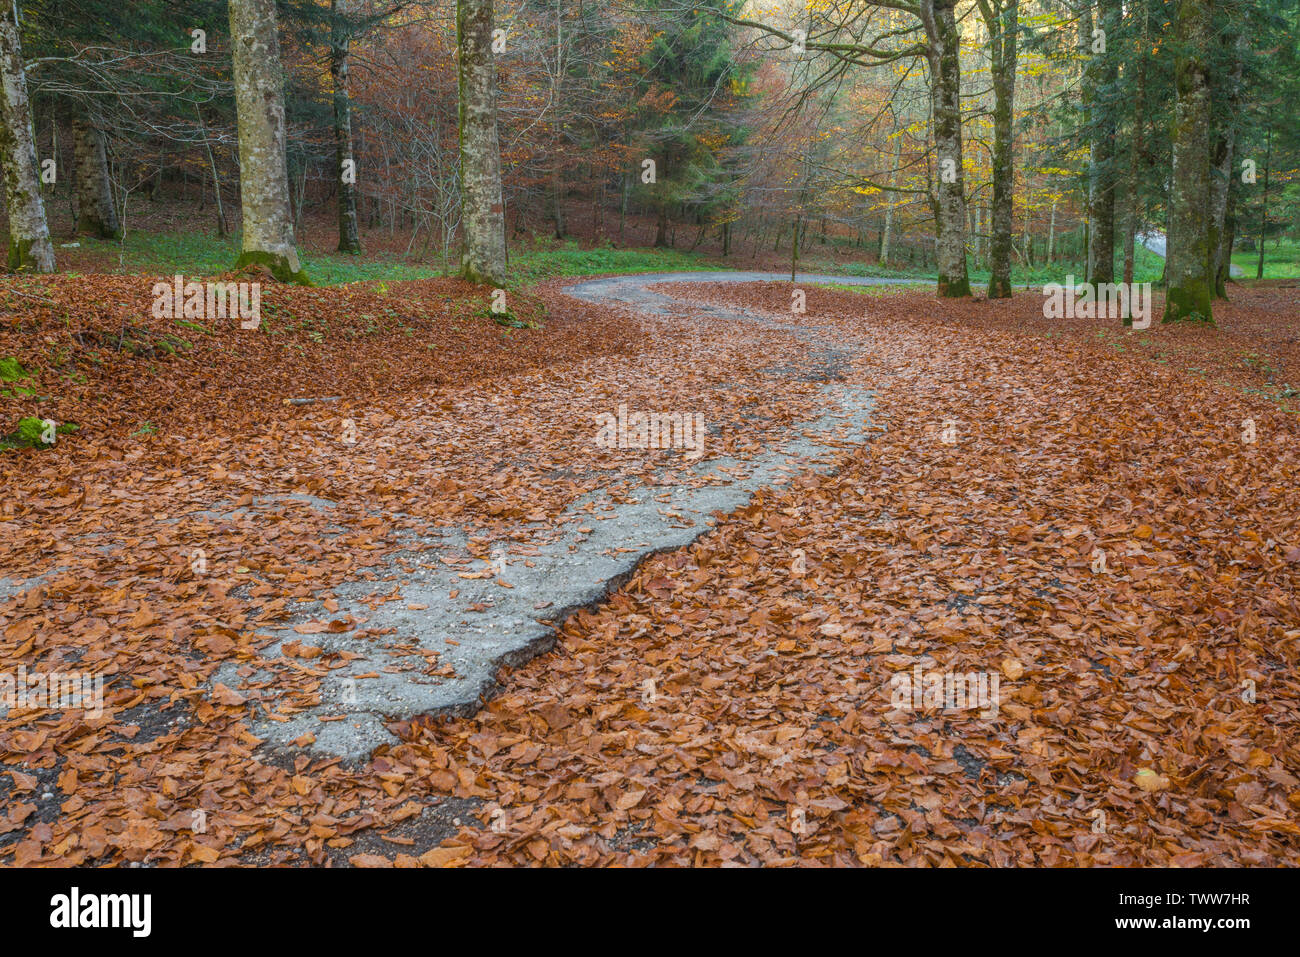 Empty small road bends through the October forest in Pian del Cansiglio, Italy. Autumn foliage with dead leaves carpeting the forest floor. Stock Photo